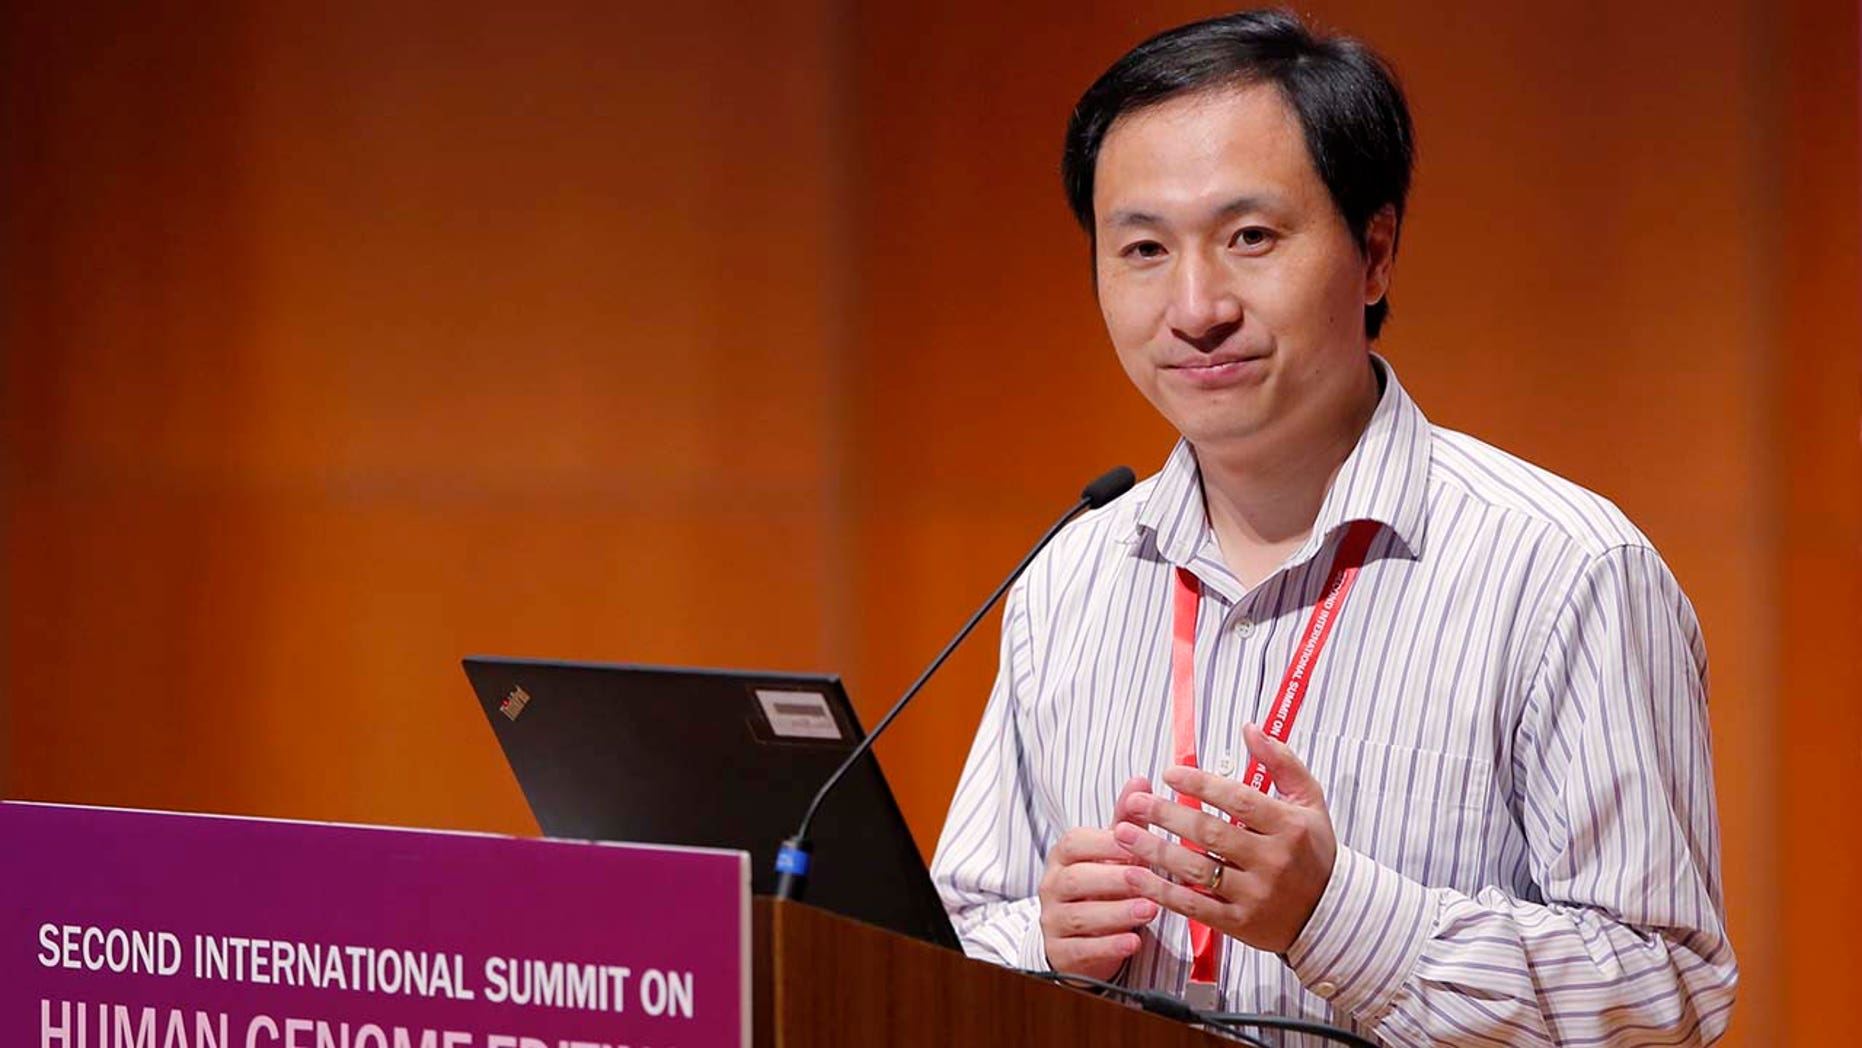 He Jiankui, Chinese researcher, speaks at the Human Genome Publishing Conference in Hong Kong on Wednesday, November 28, 2018. (AP Photo / Kin Cheung)